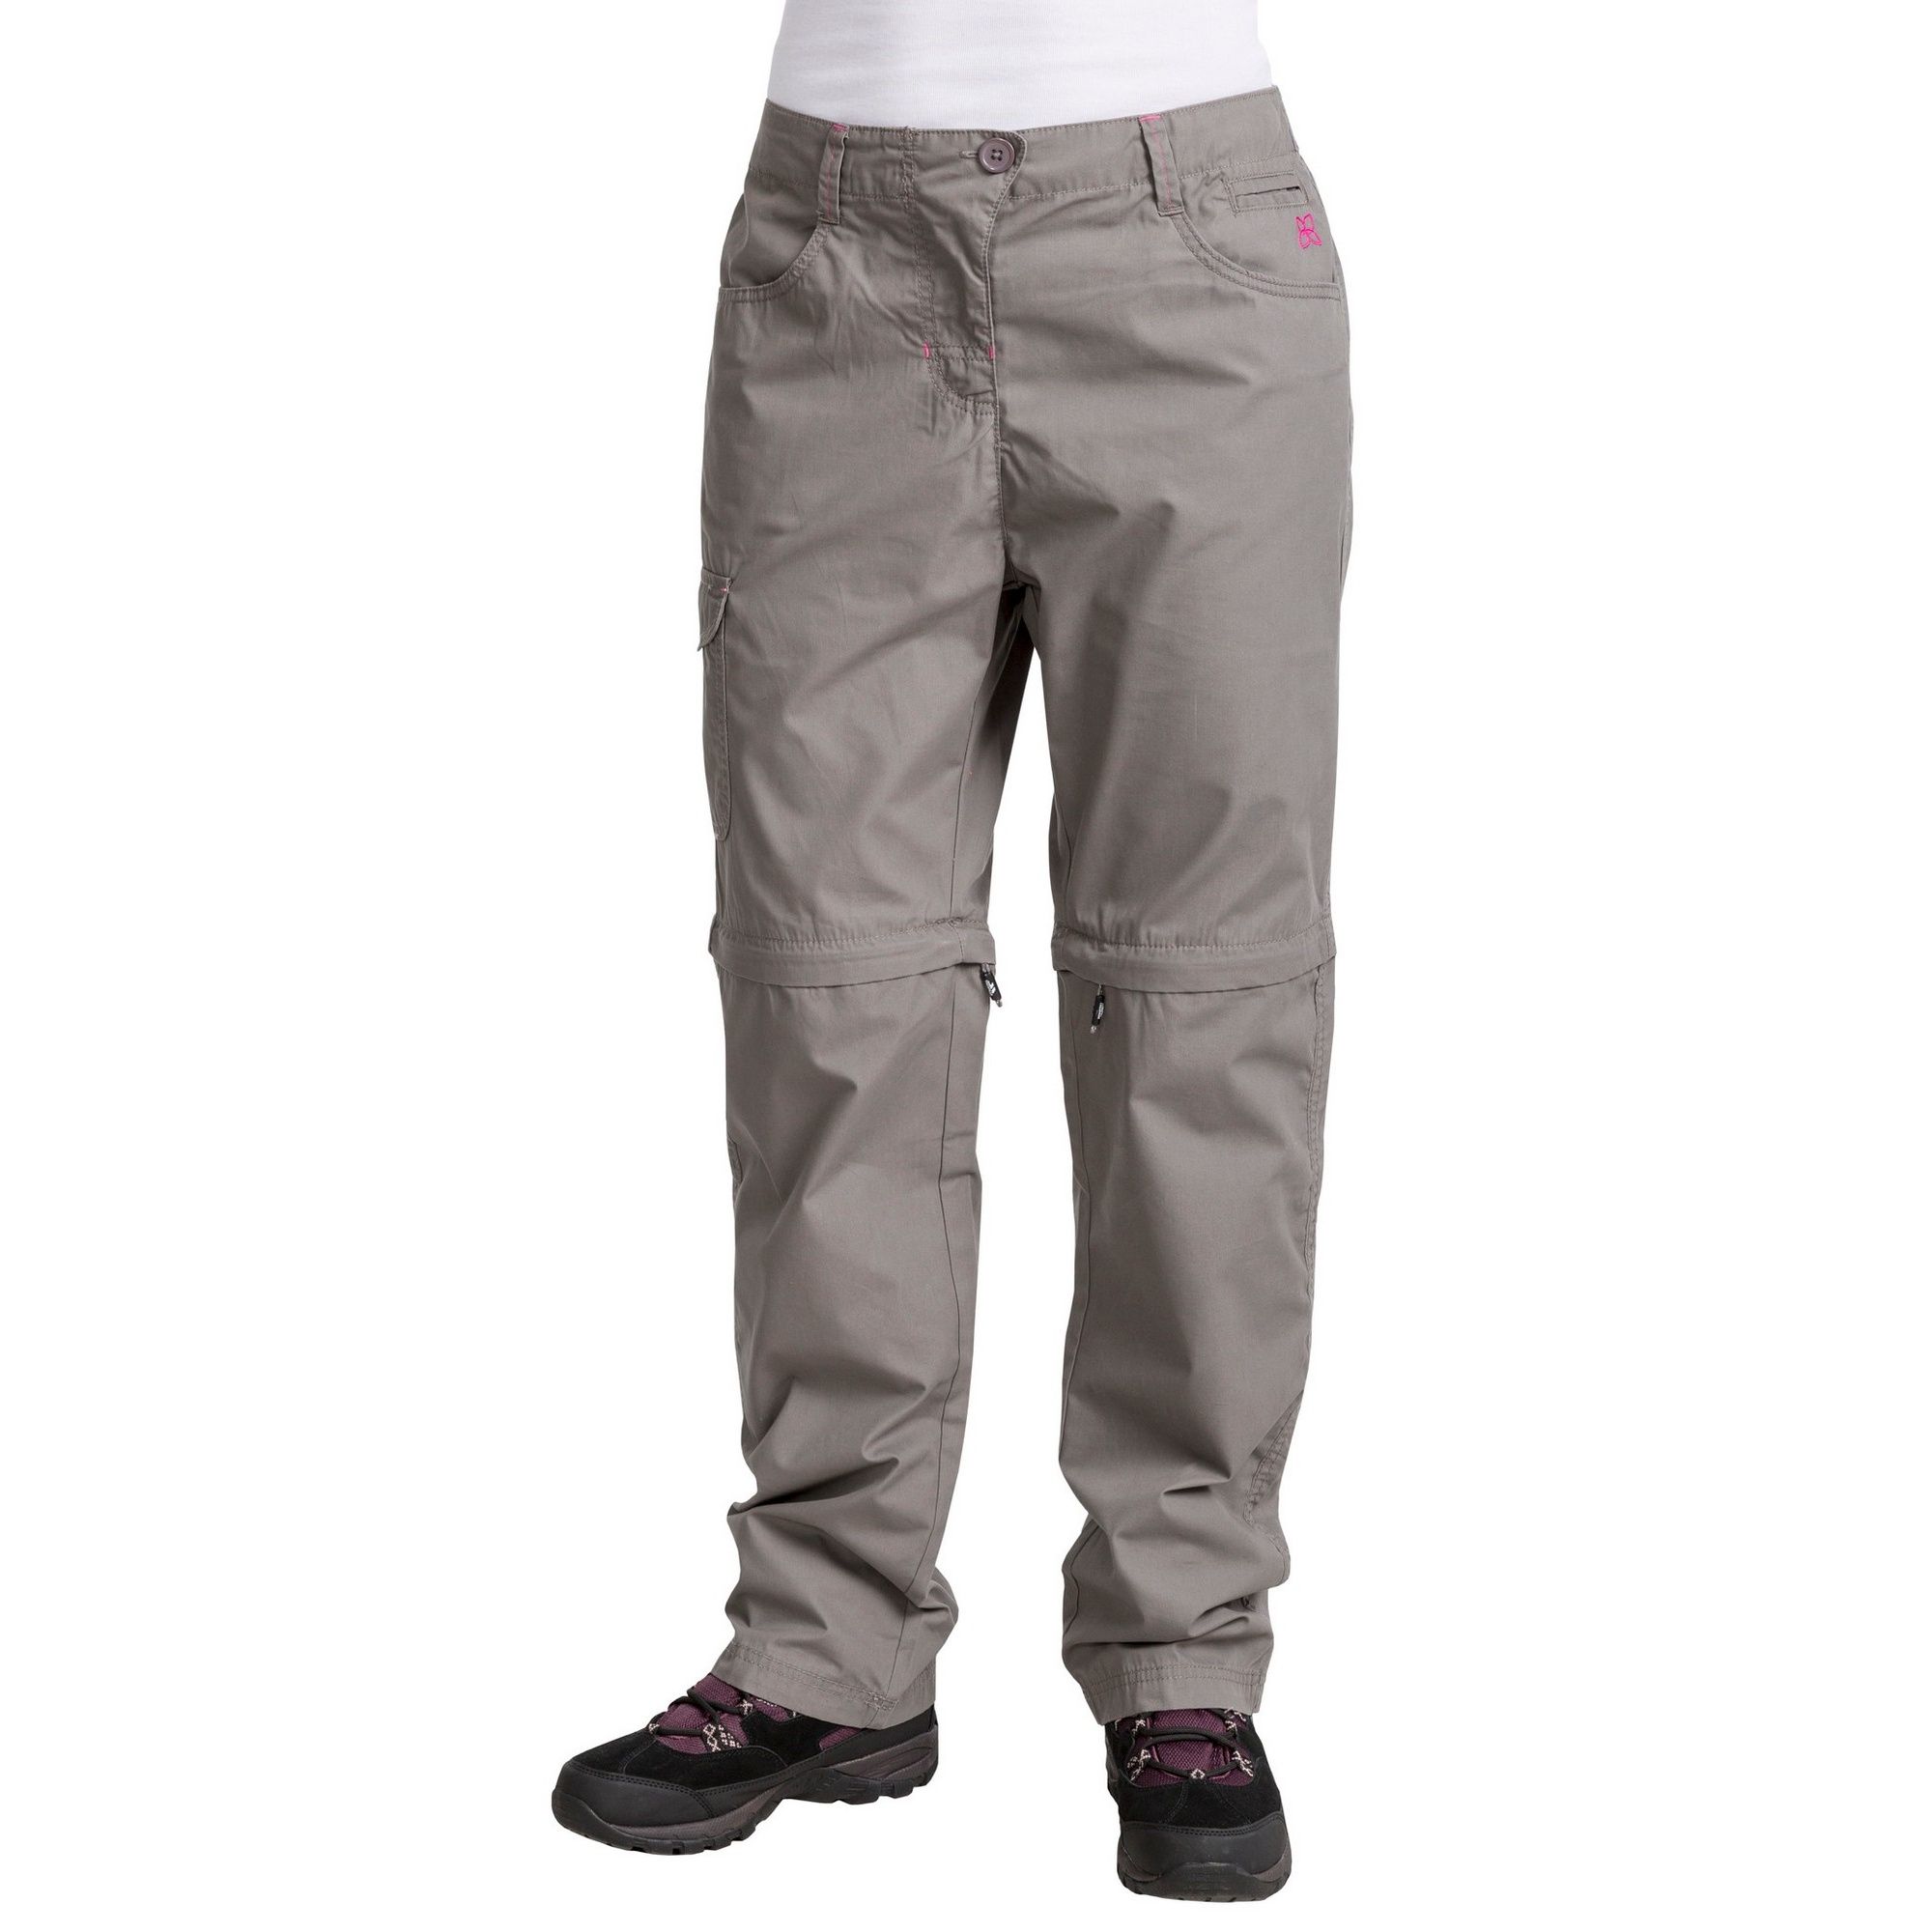 Adjustable waist with back elastic. Belt loops. 4 pockets. Zip off legs for mid length shorts. UV 40+. Water repellent DWR. 65% Polyester, 35% Cotton, peached, garment washed. Trespass Womens Waist Sizing (approx): XS/8 - 25in/66cm, S/10 - 28in/71cm, M/12 - 30in/76cm, L/14 - 32in/81cm, XL/16 - 34in/86cm, XXL/18 - 36in/91.5cm.